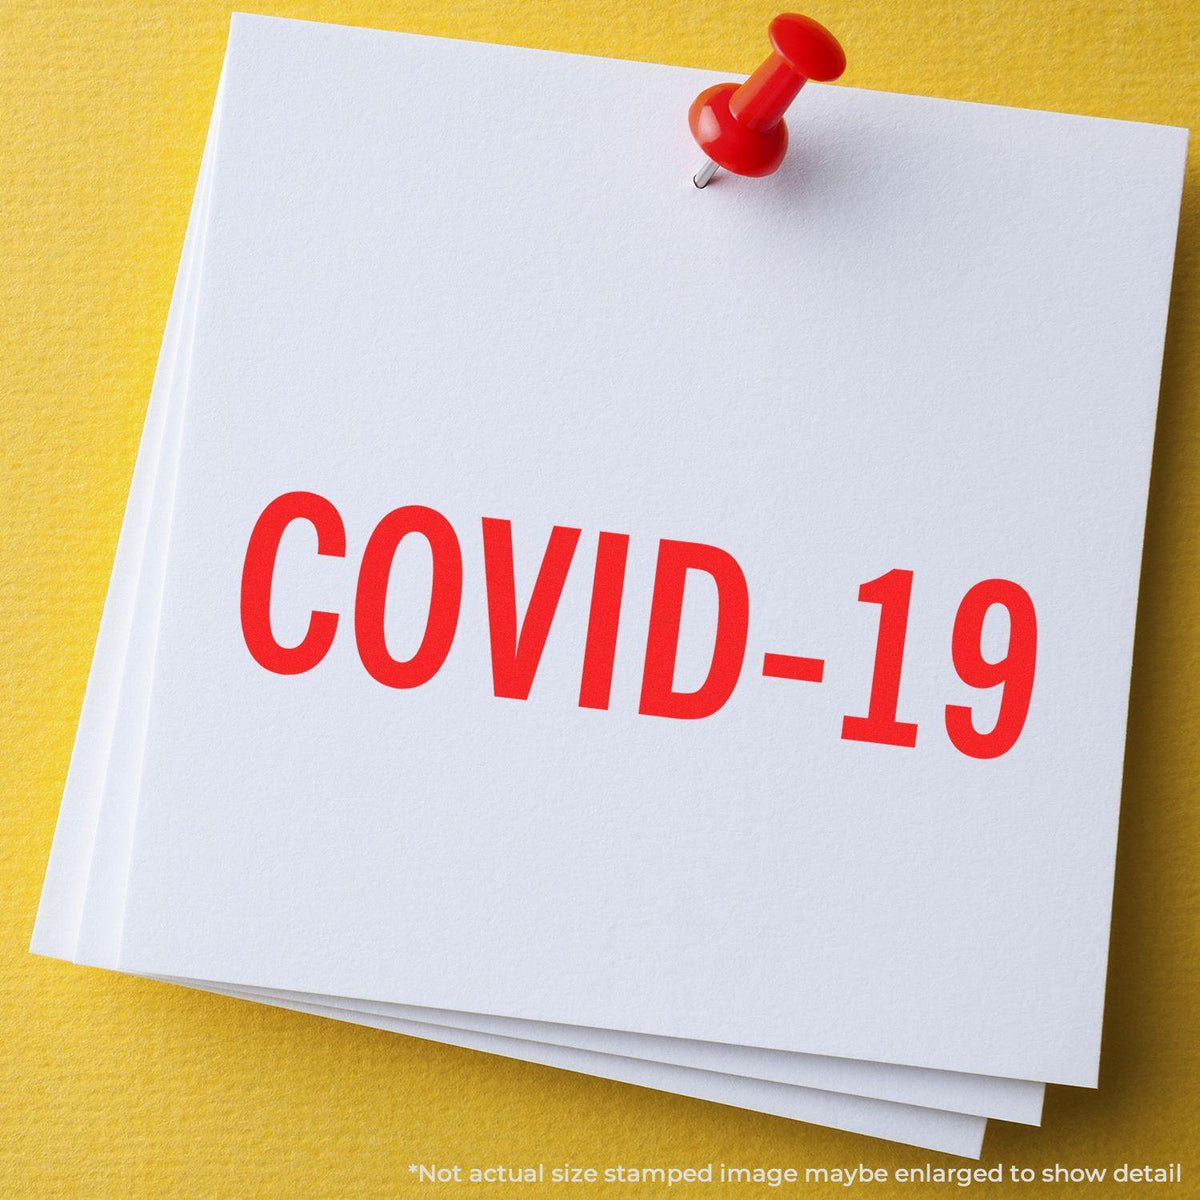 Bold Covid-19 Rubber Stamp In Use Photo